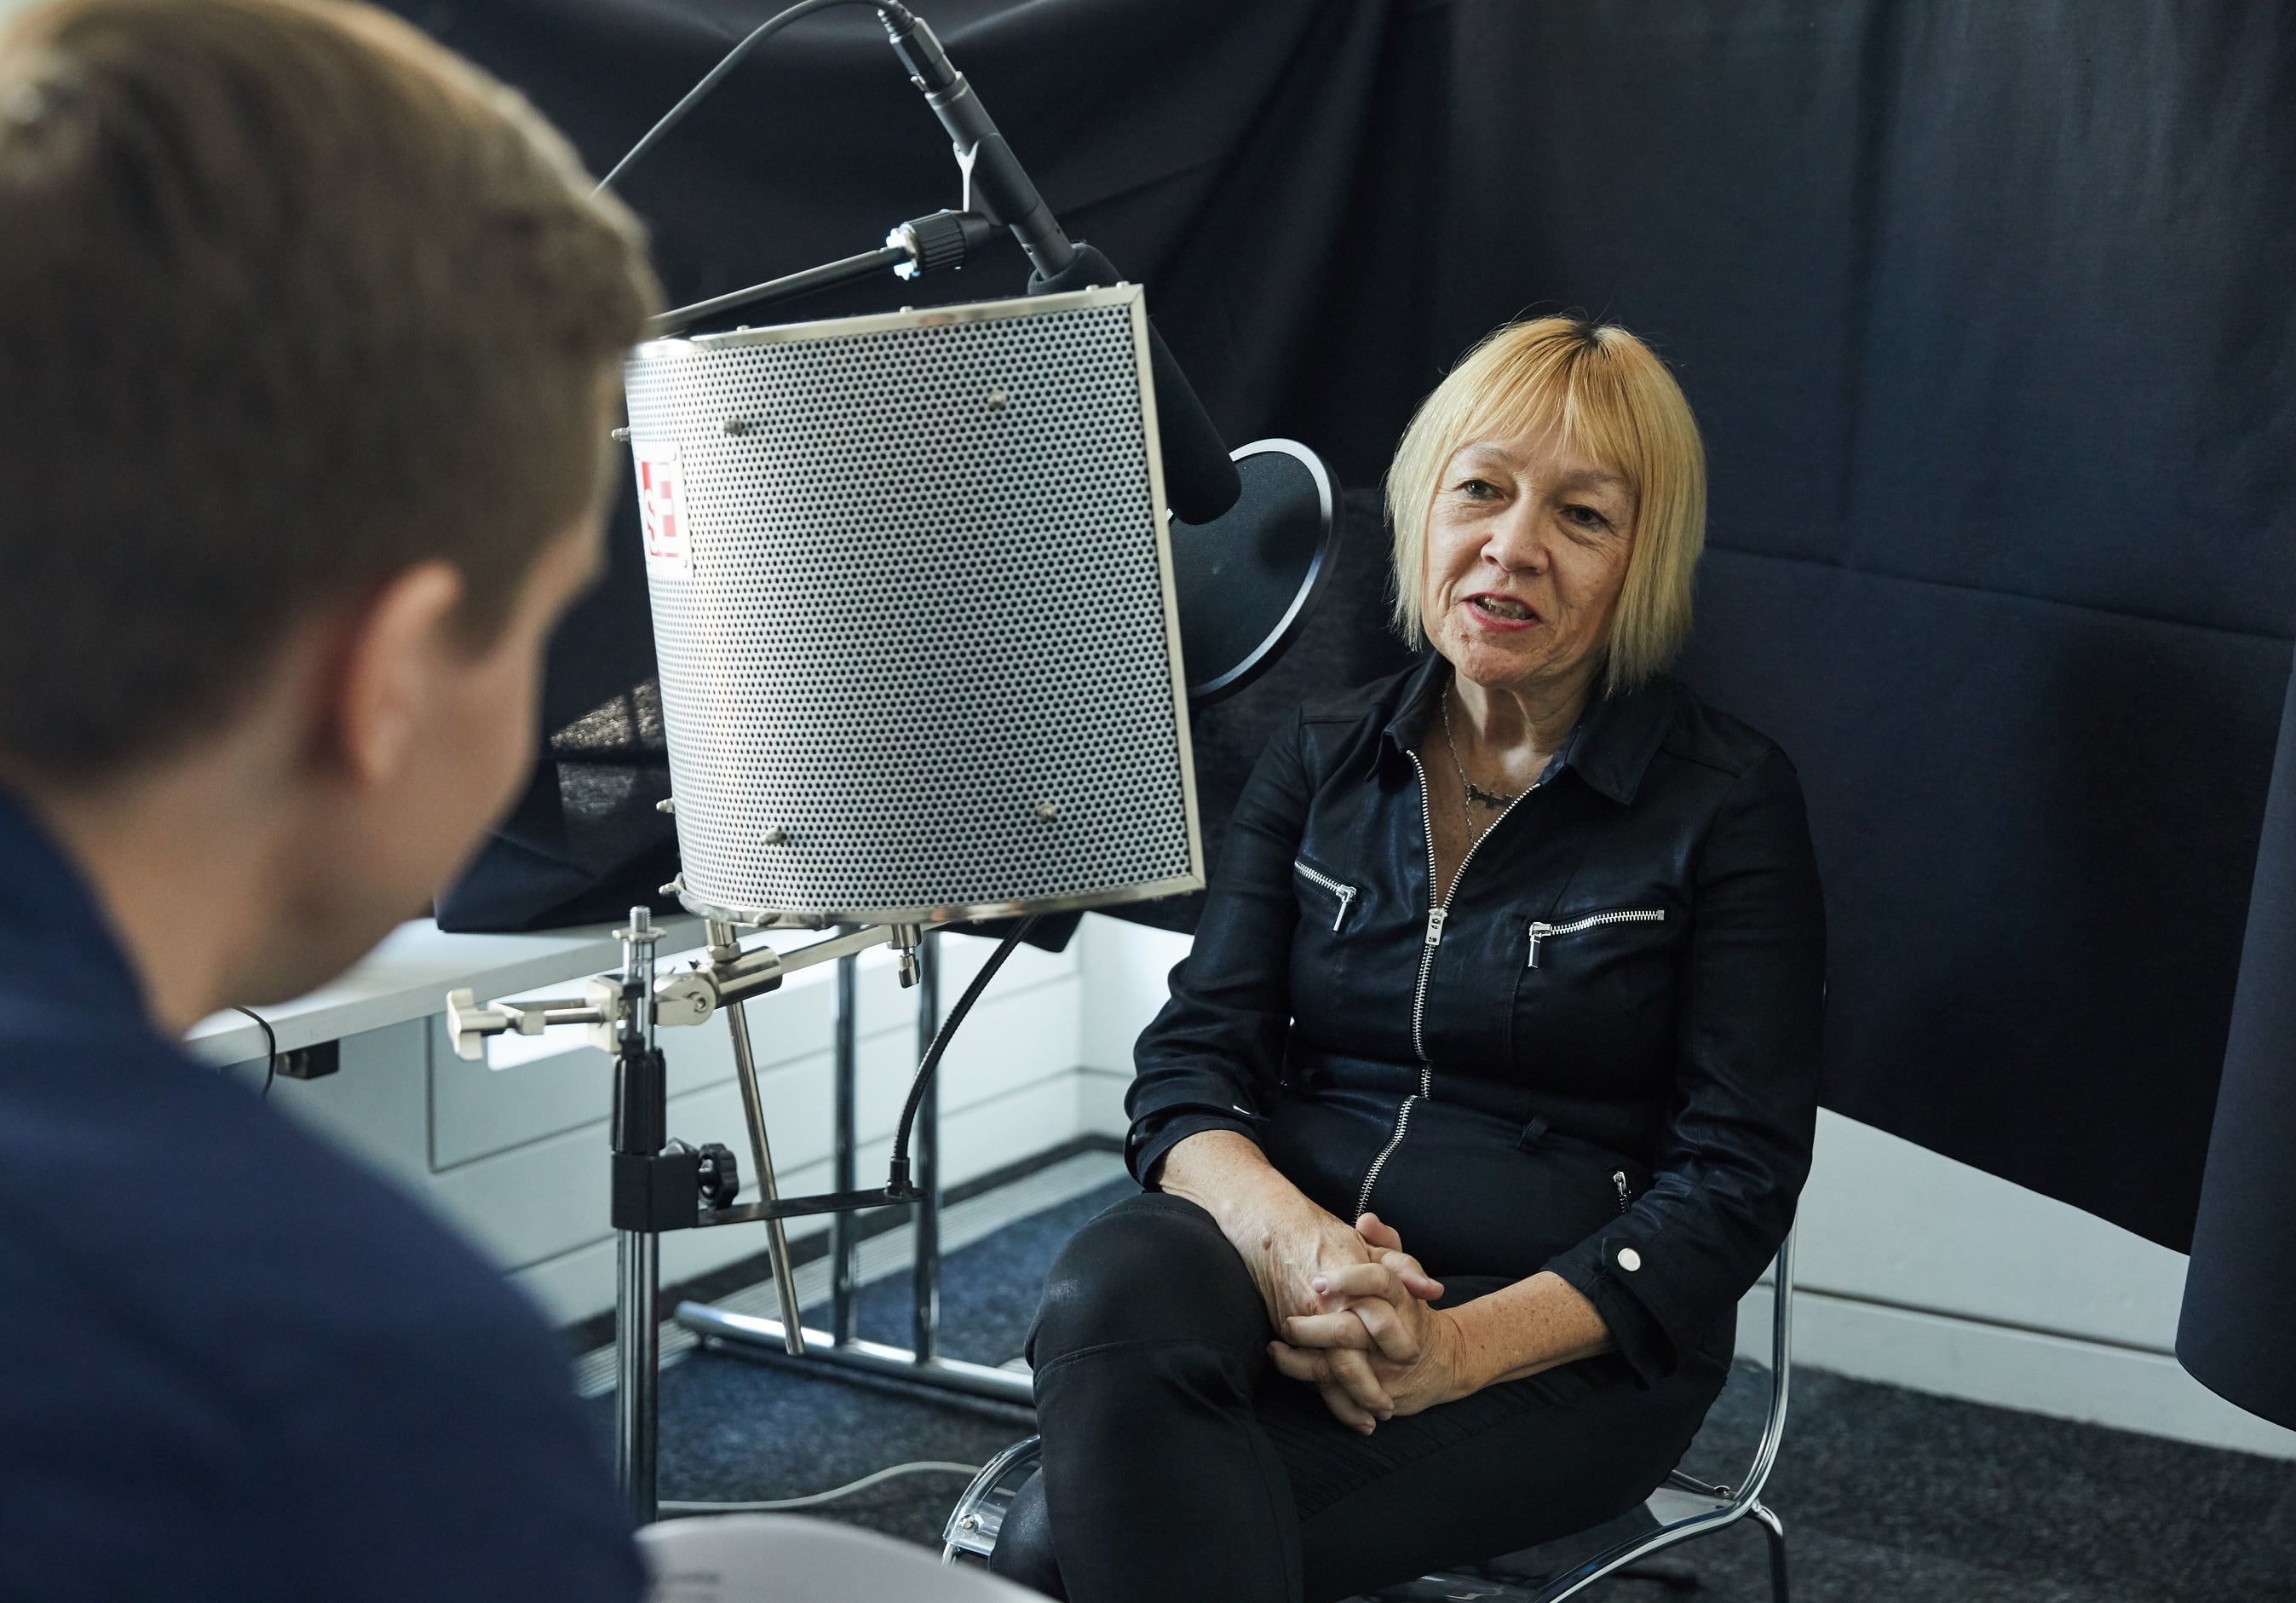 The Cindy Gallop Guide To Turning A Cheeky Topic Into A Serious